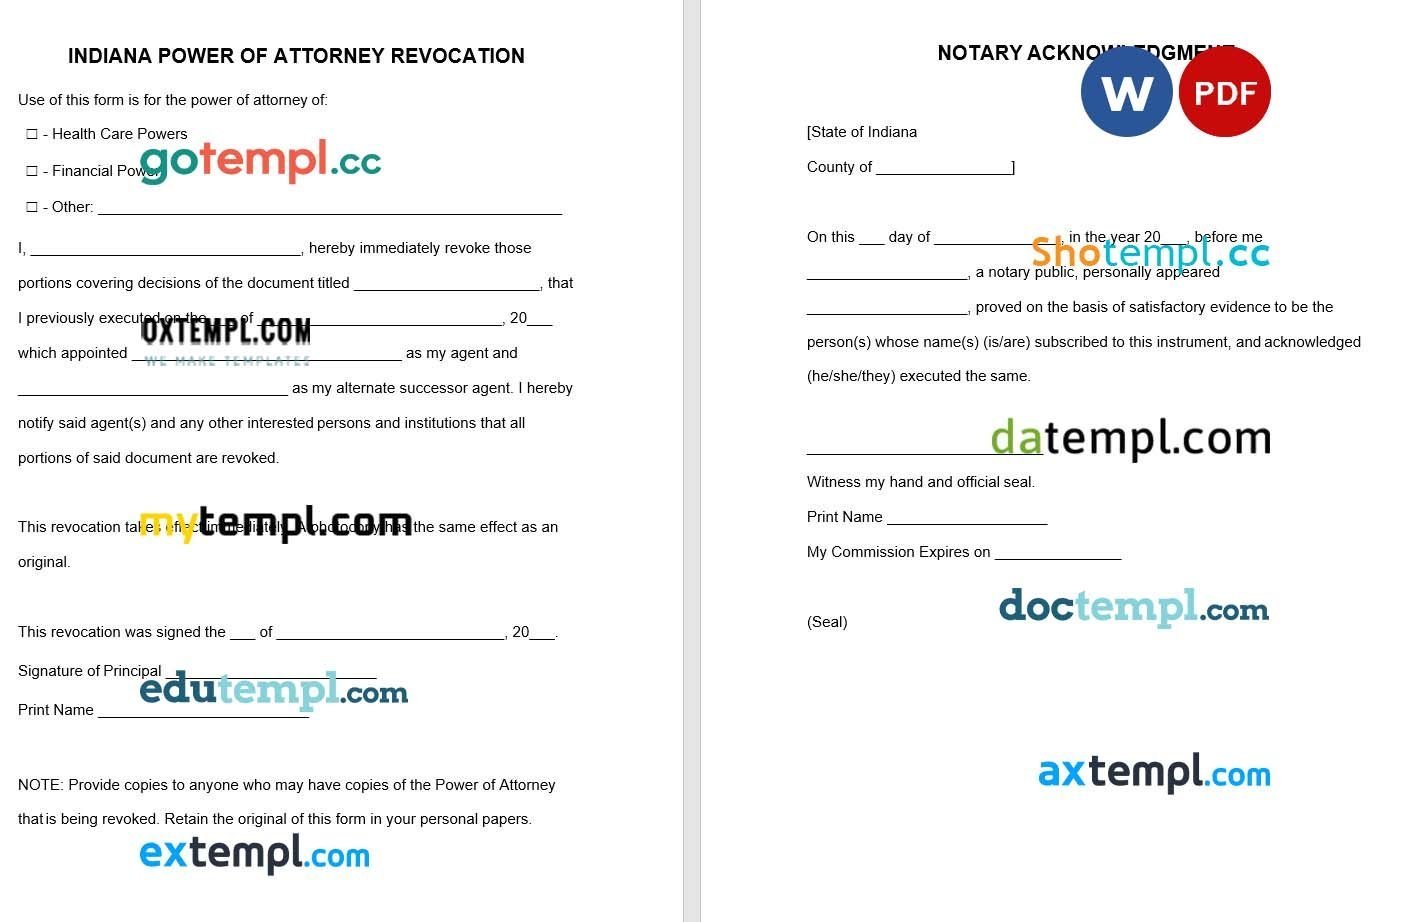 Indiana Power of Attorney Revocation Form example, fully editable